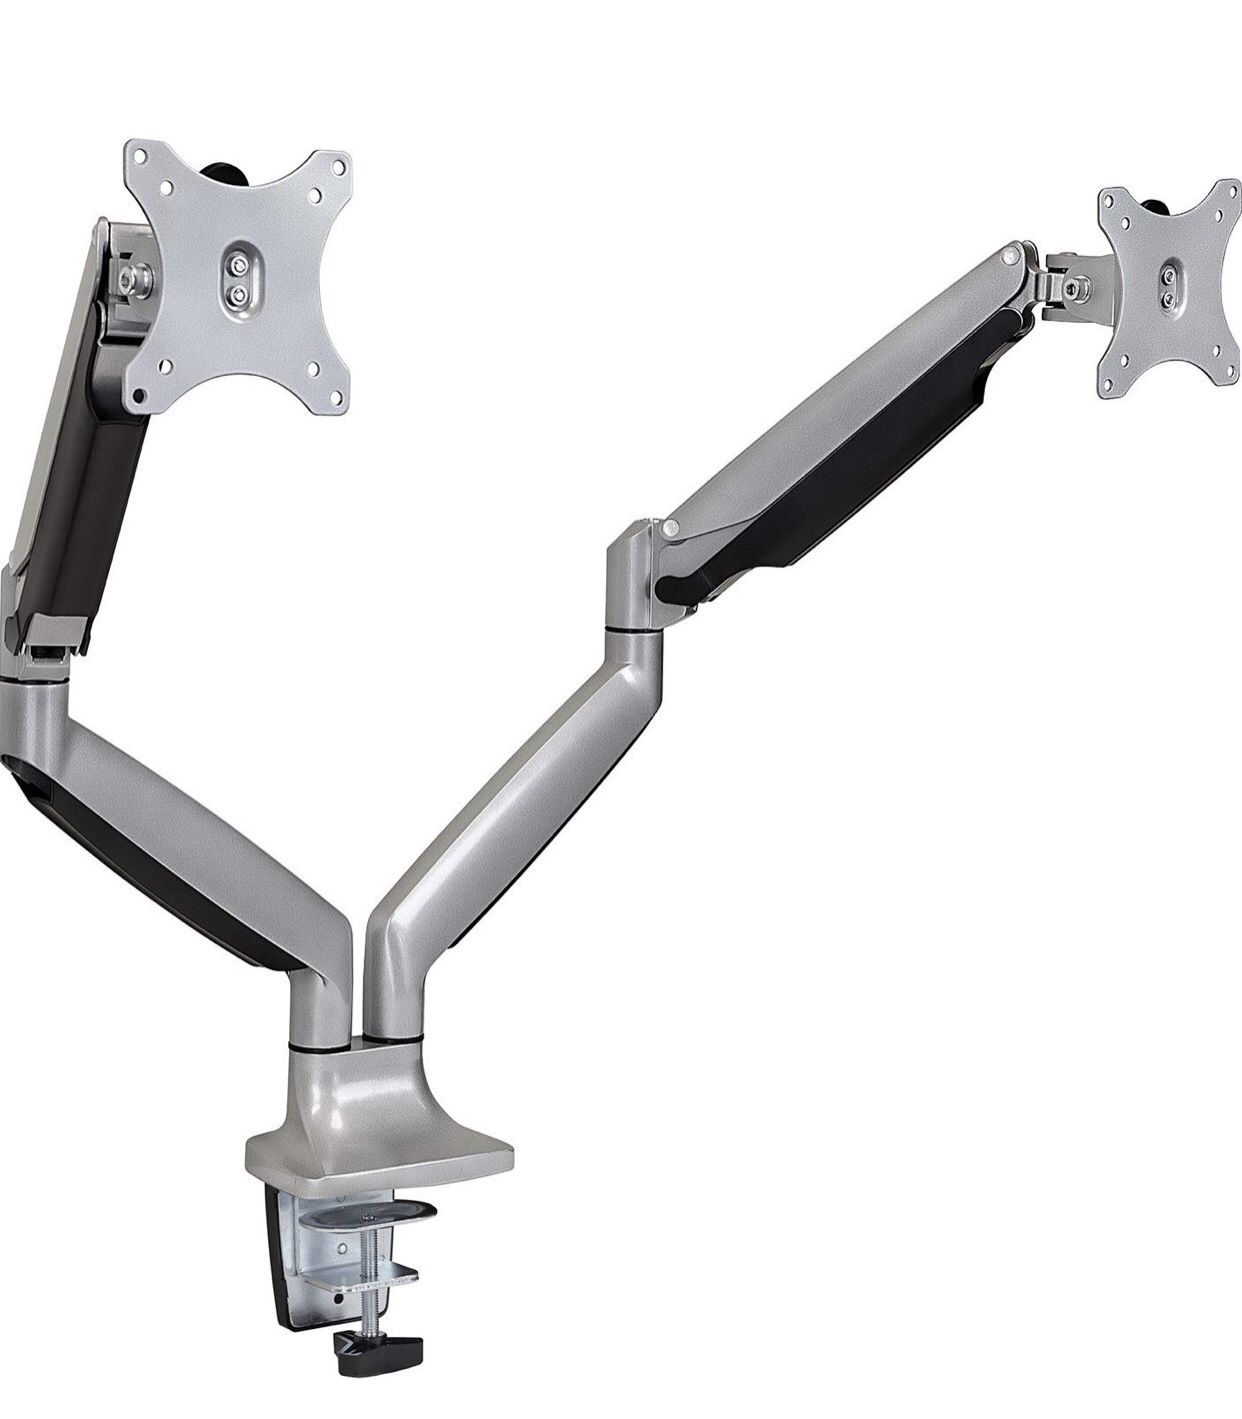 Mount It! Dual Monitor Arms for Desk, Height Adjustable Full Motion Monitor Stand With Gas Spring Arms, Fits 24, 27, 29, 30, 32 Inch Computer Screens